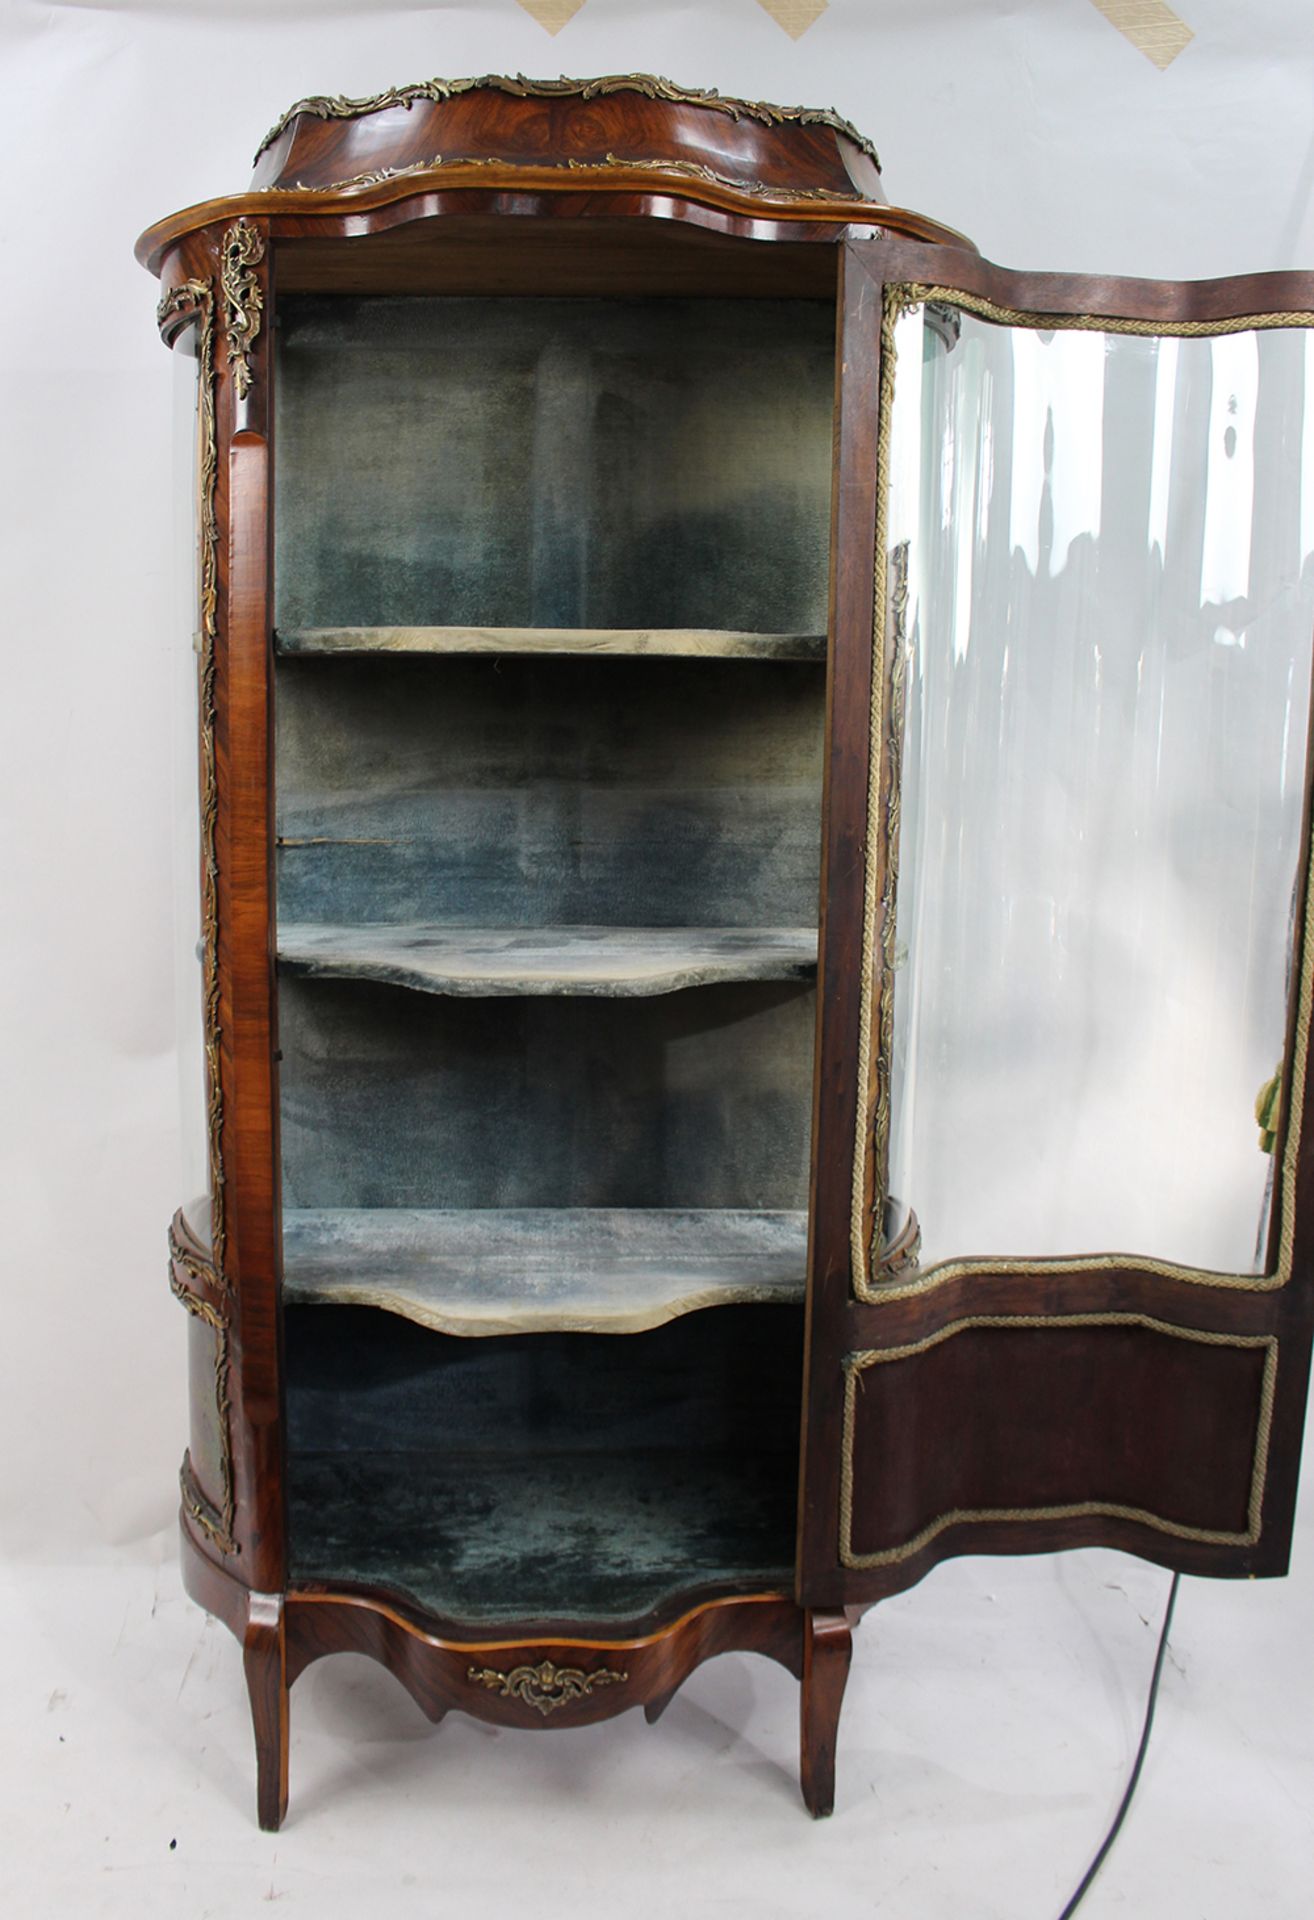 Antique French Serpentine Vernis Martin Display Cabinet - Image 4 of 12